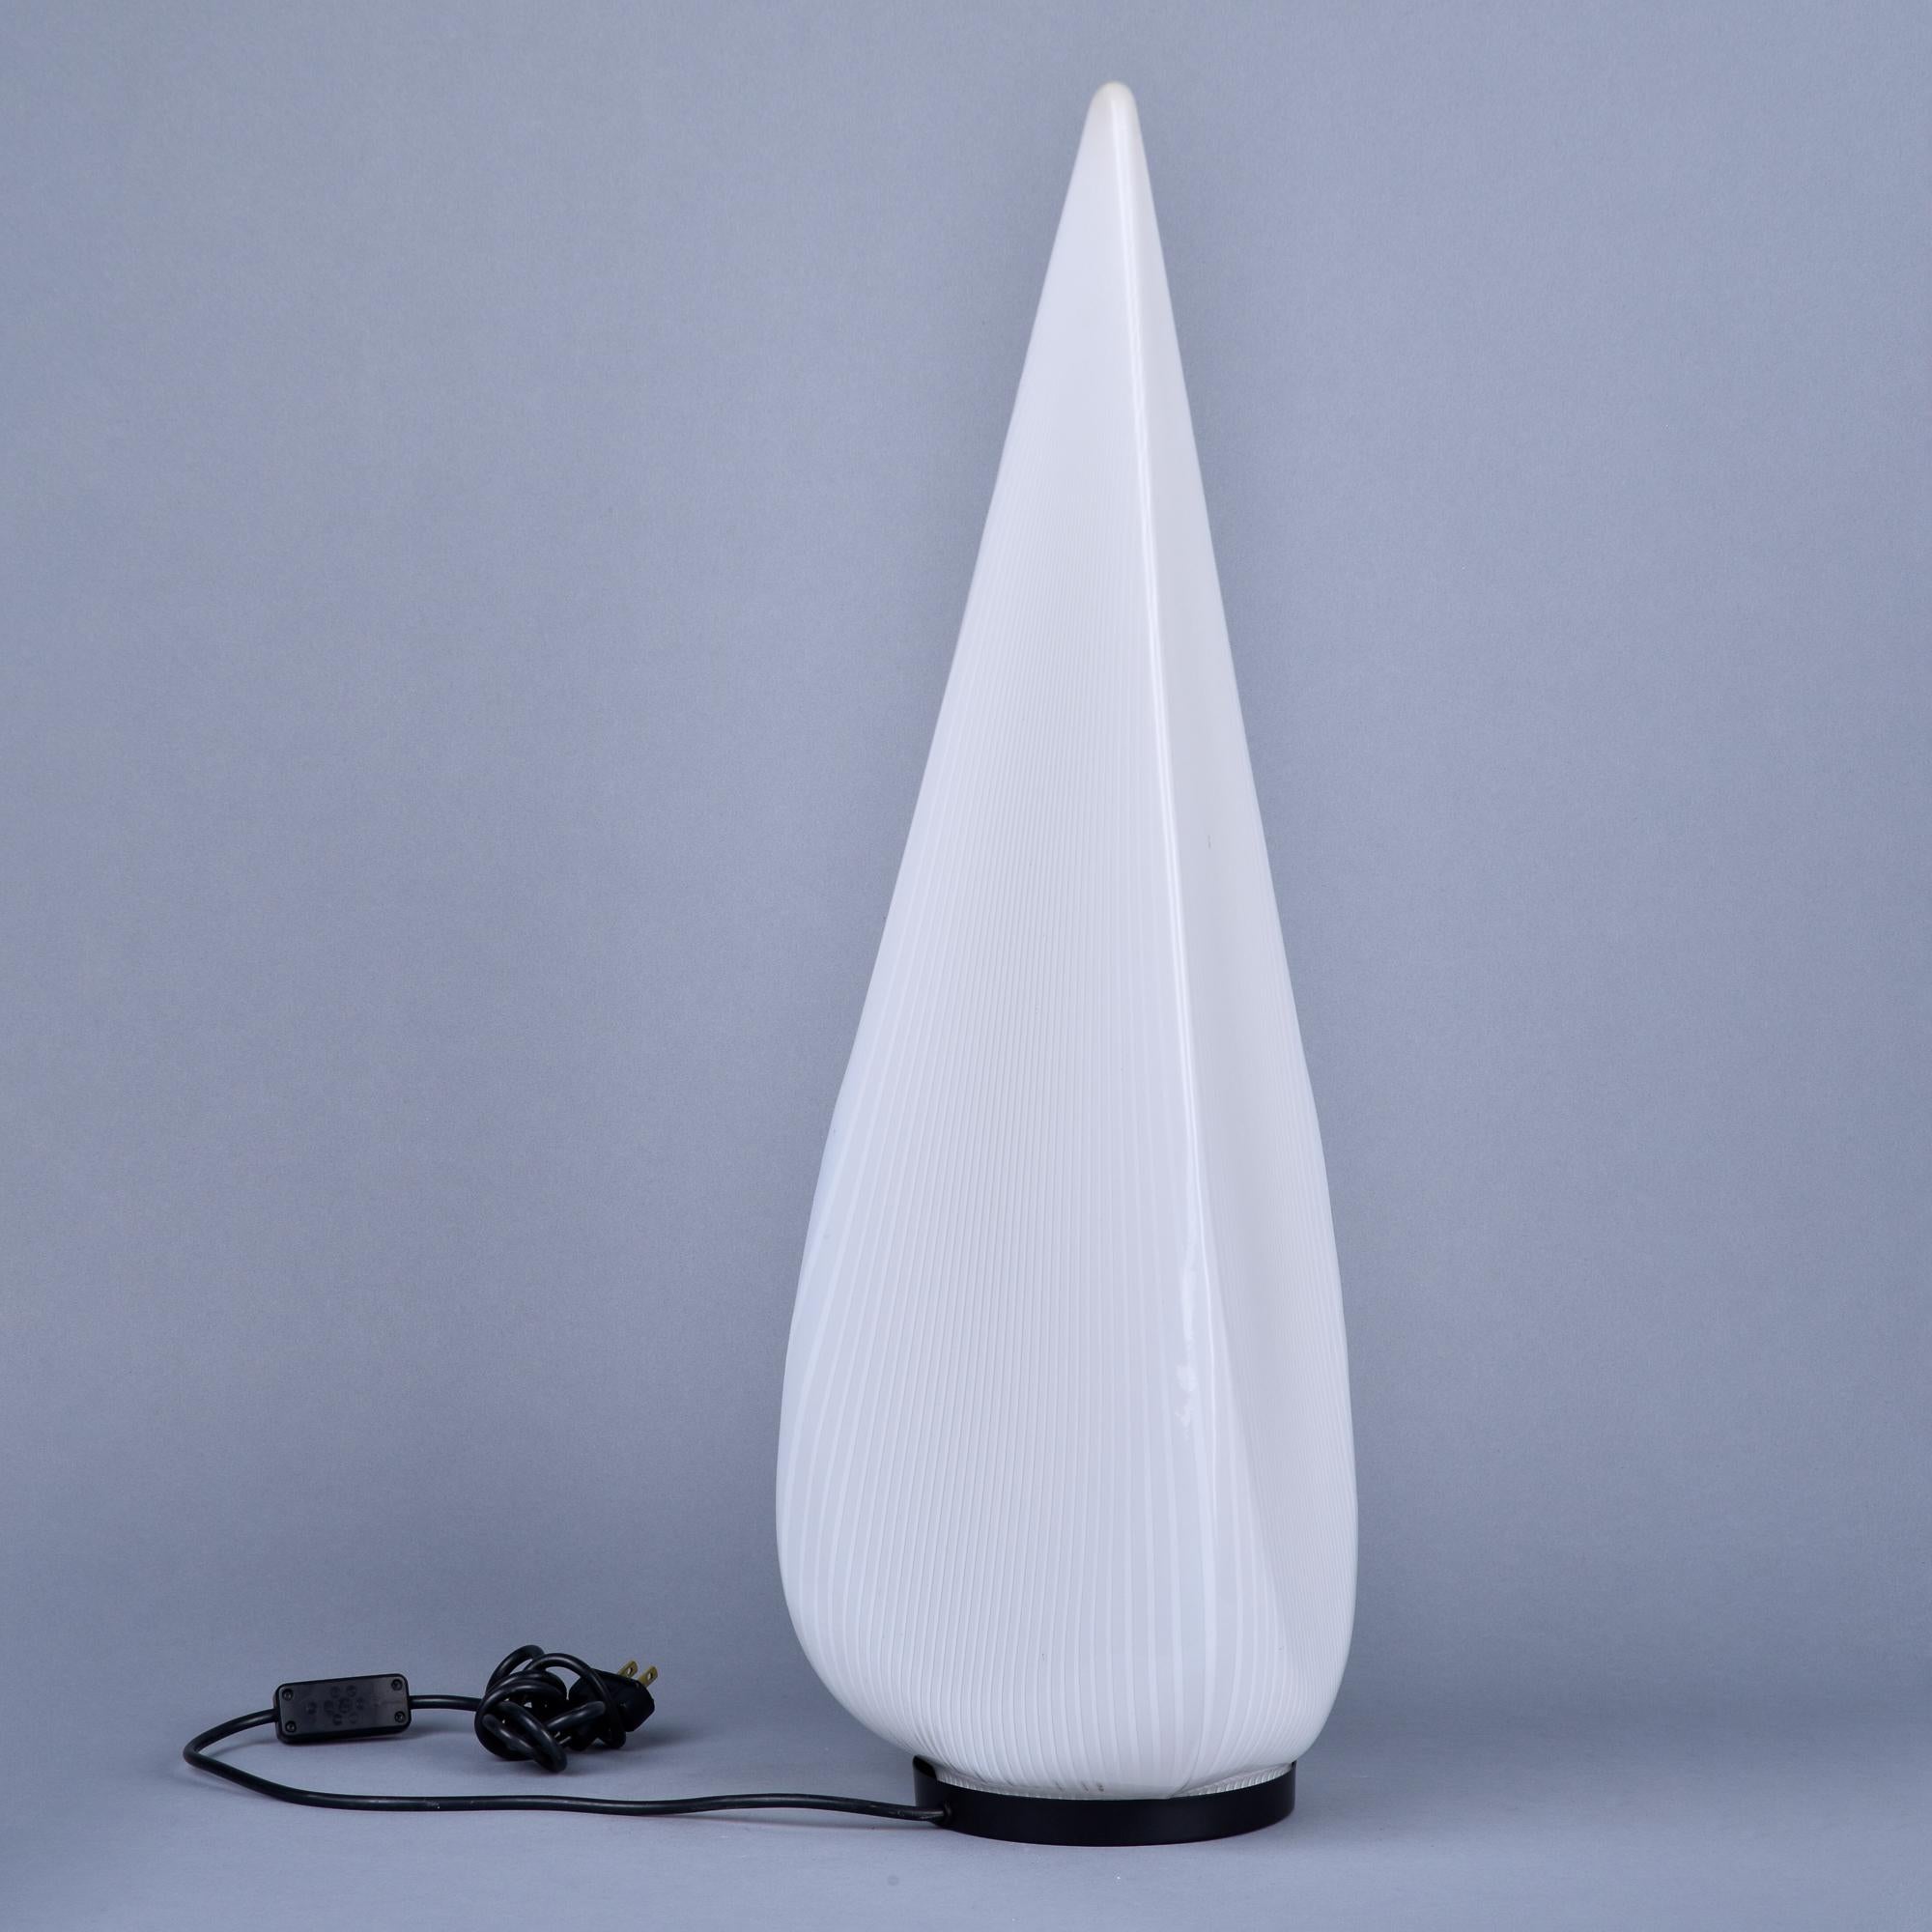 Found in Italy, this circa 1960s table lamp is just under 30” tall with a white tear-drop shaped shade of mouth blown glass. Shade has three sides, subtle white tonal striping and covers a single internal socket. New wiring for US electrical